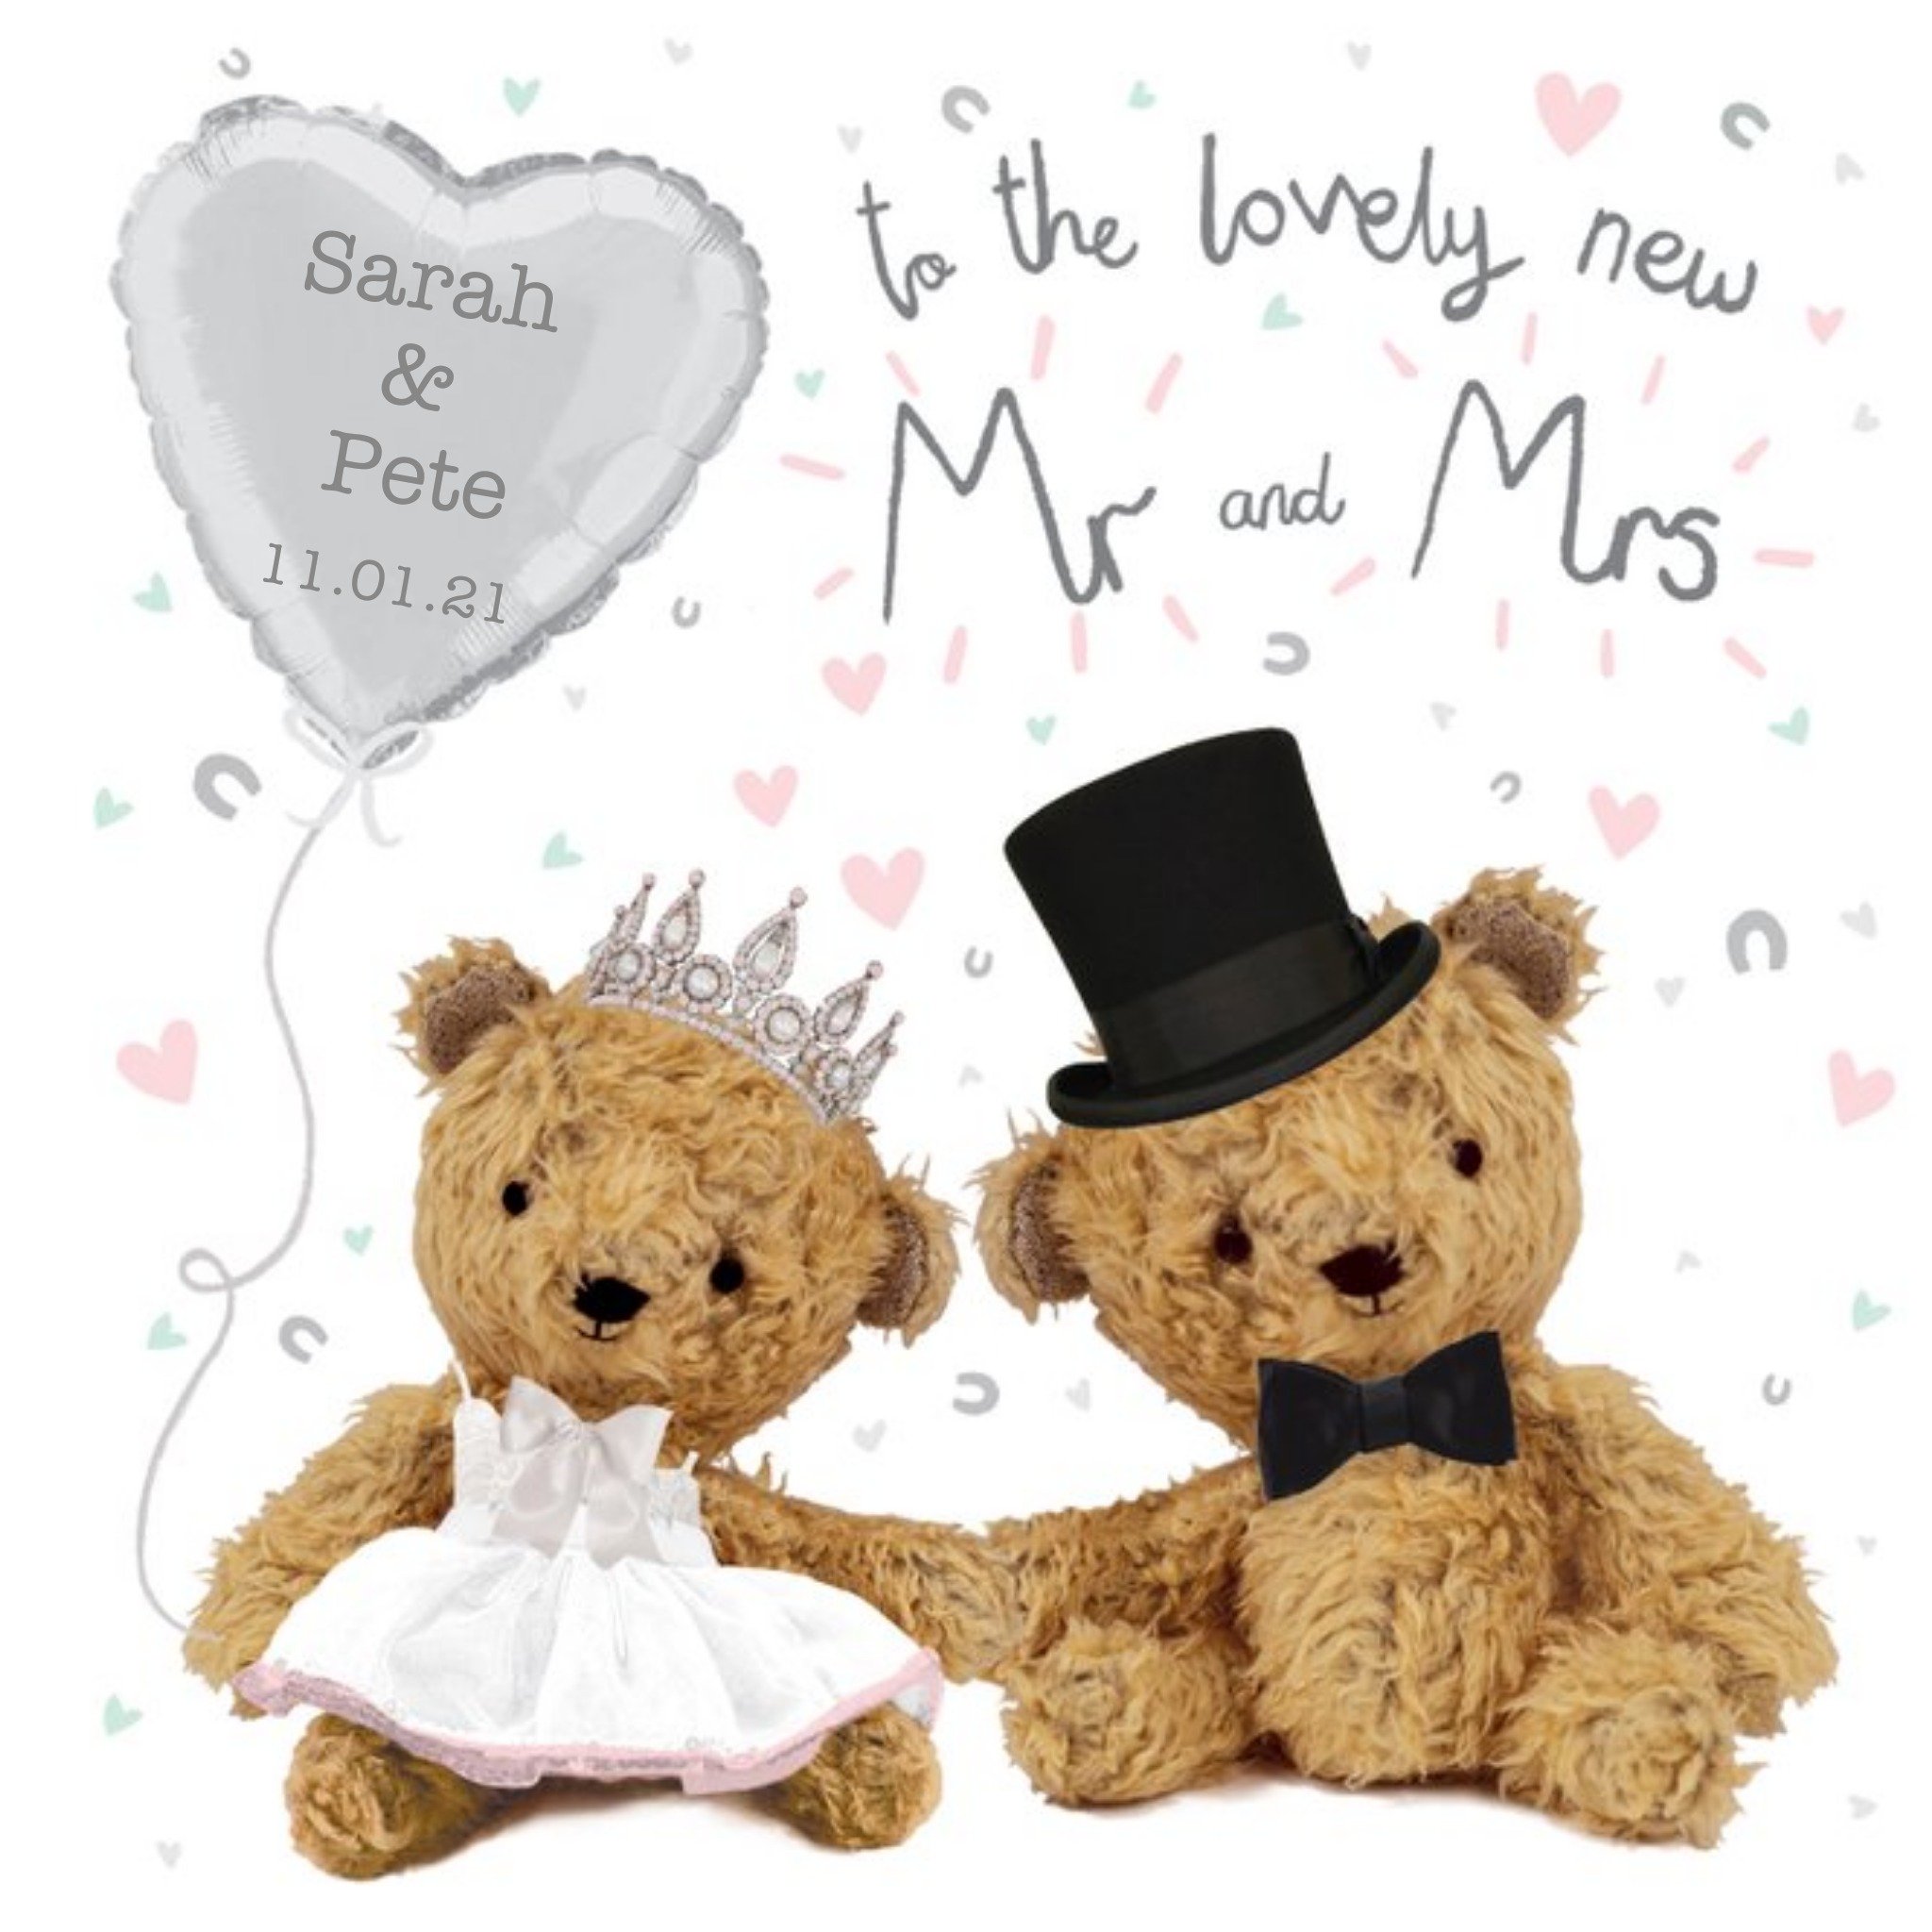 Moonpig Clintons To The Lovely New Mr & Mrs Card, Large